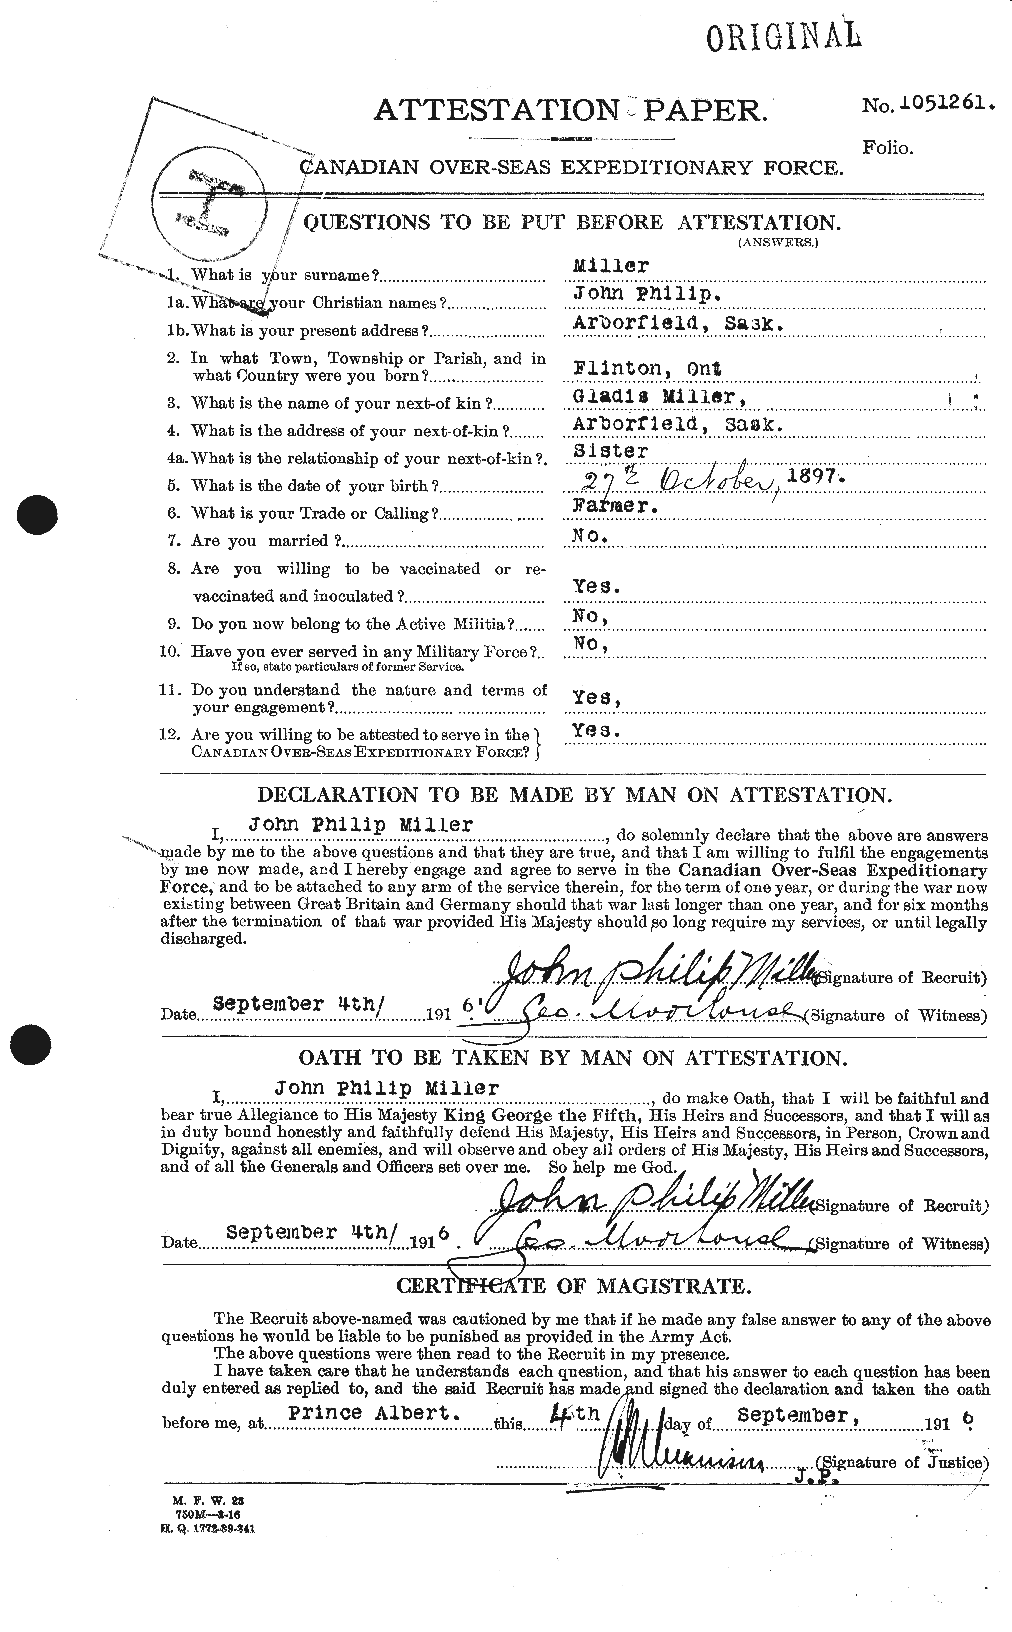 Personnel Records of the First World War - CEF 505318a